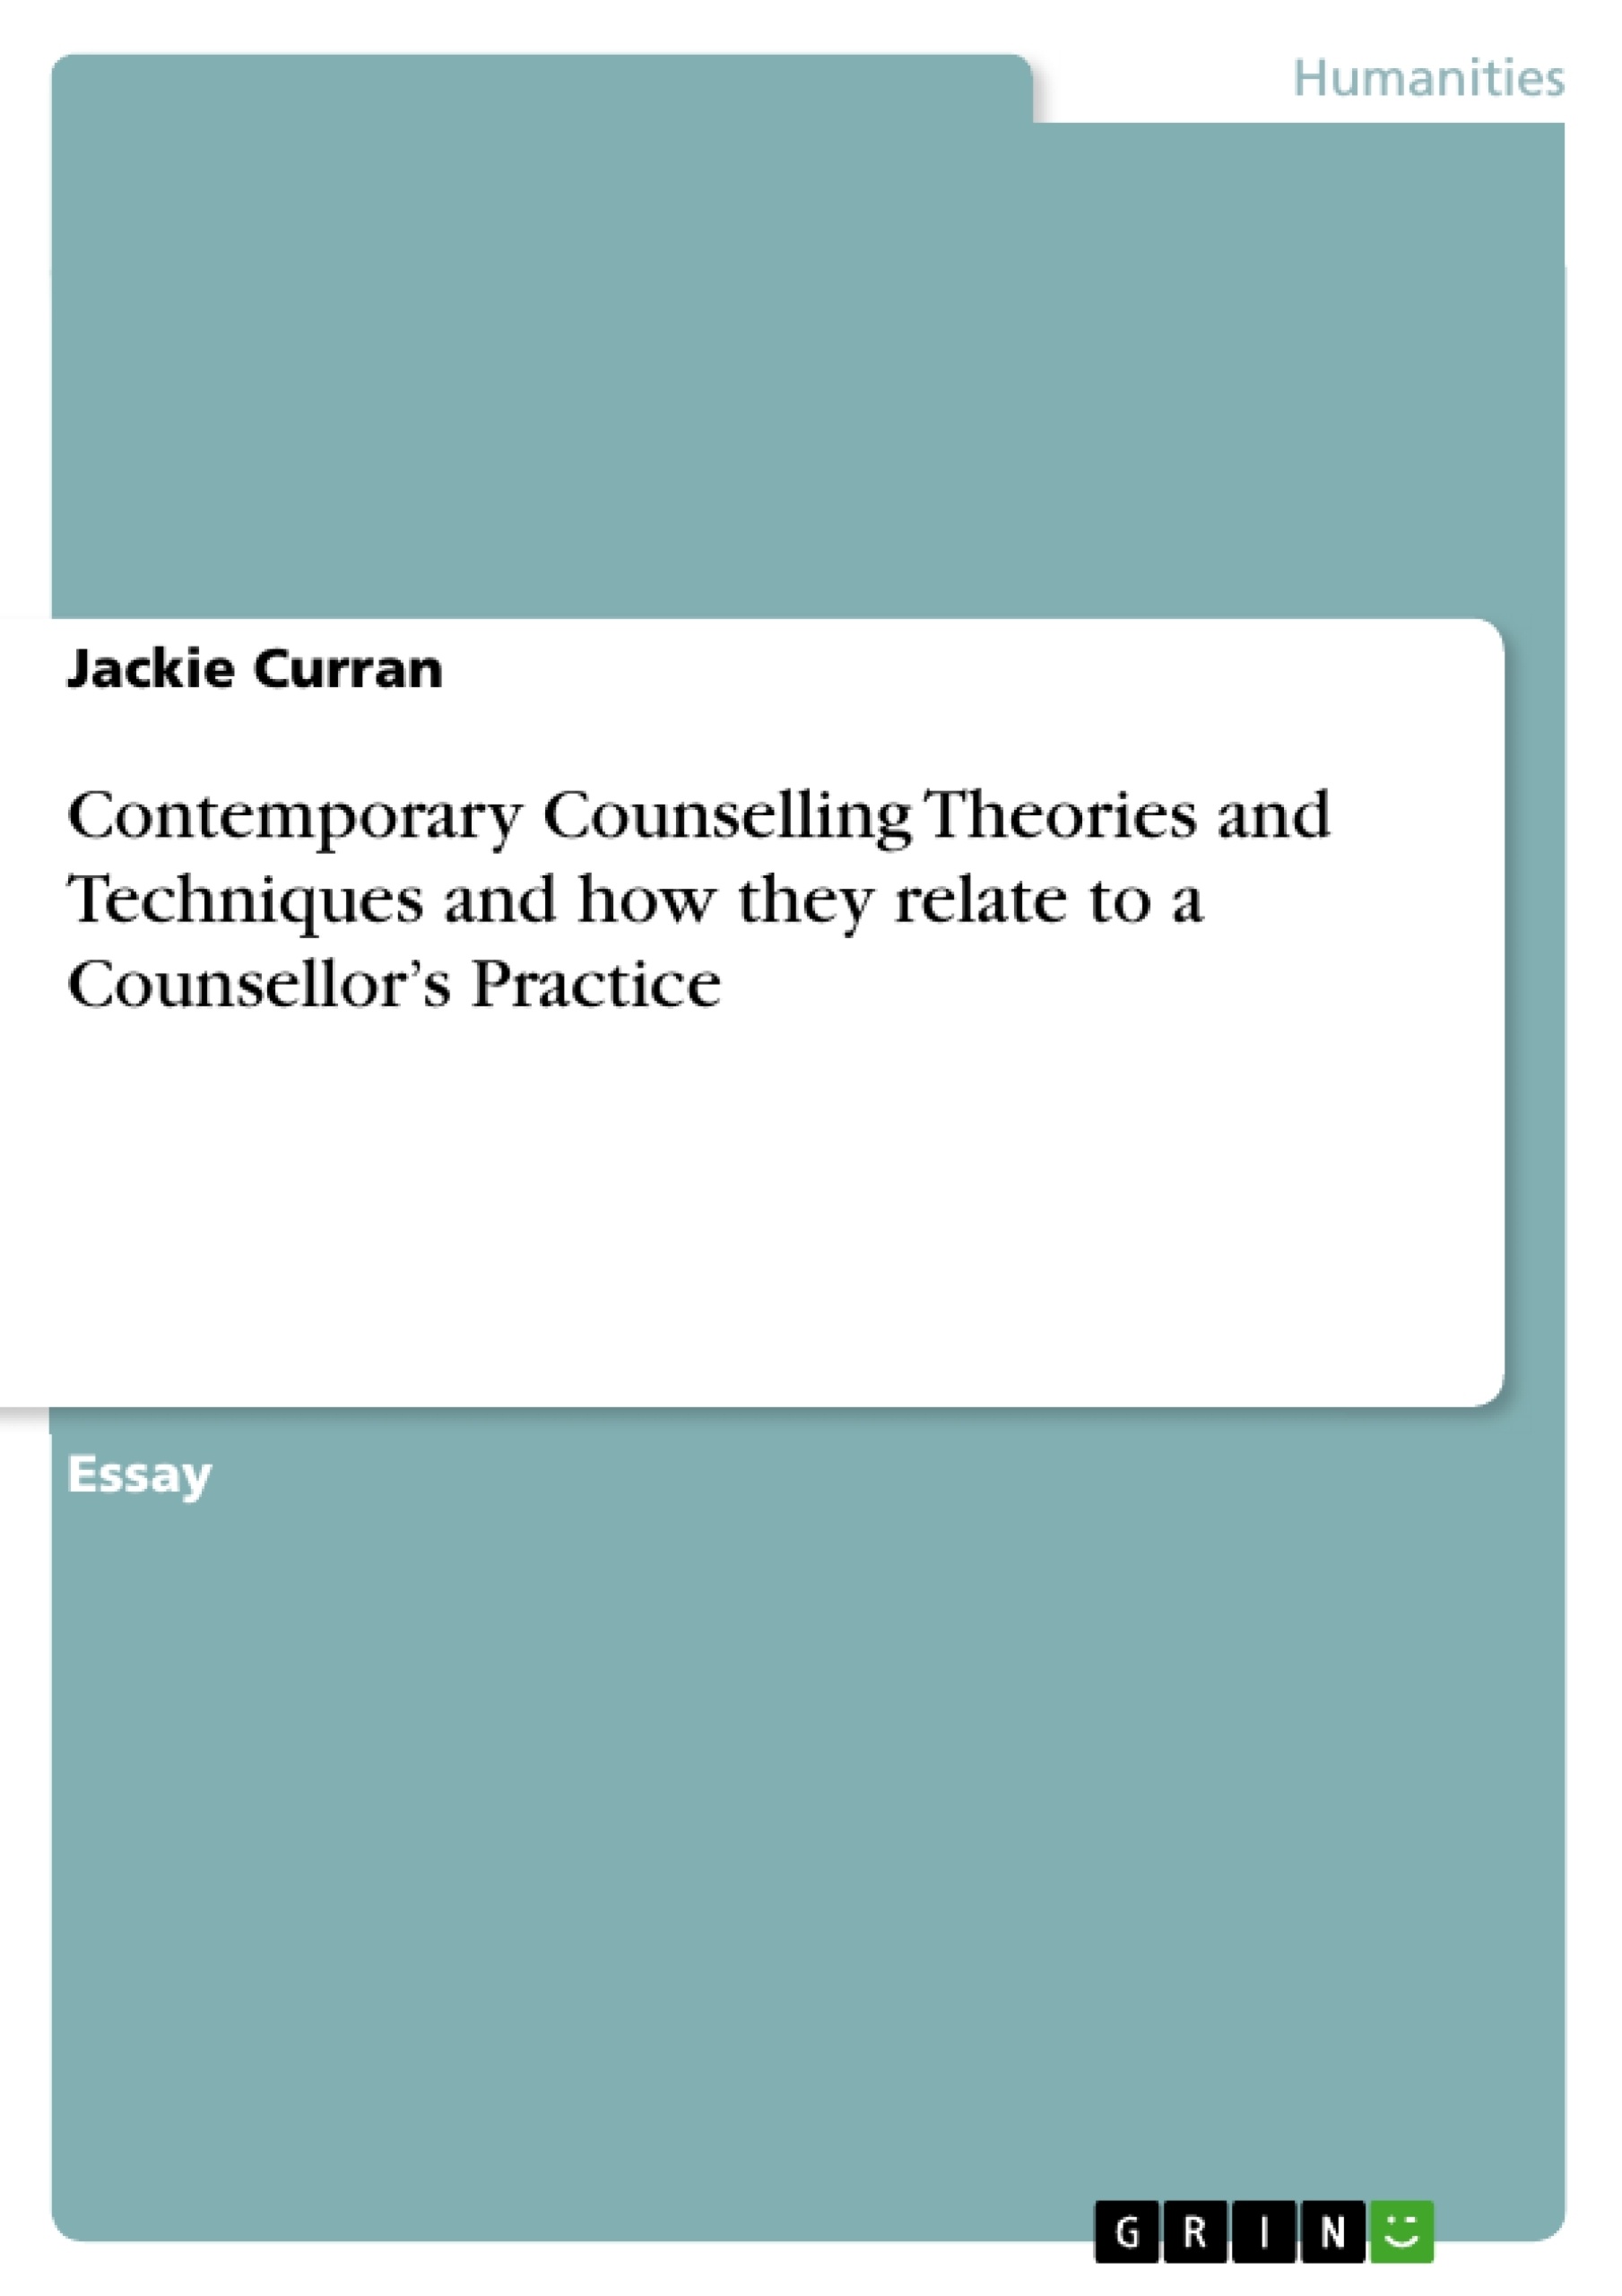 Titre: Contemporary Counselling Theories and Techniques and how they relate to a Counsellor’s Practice